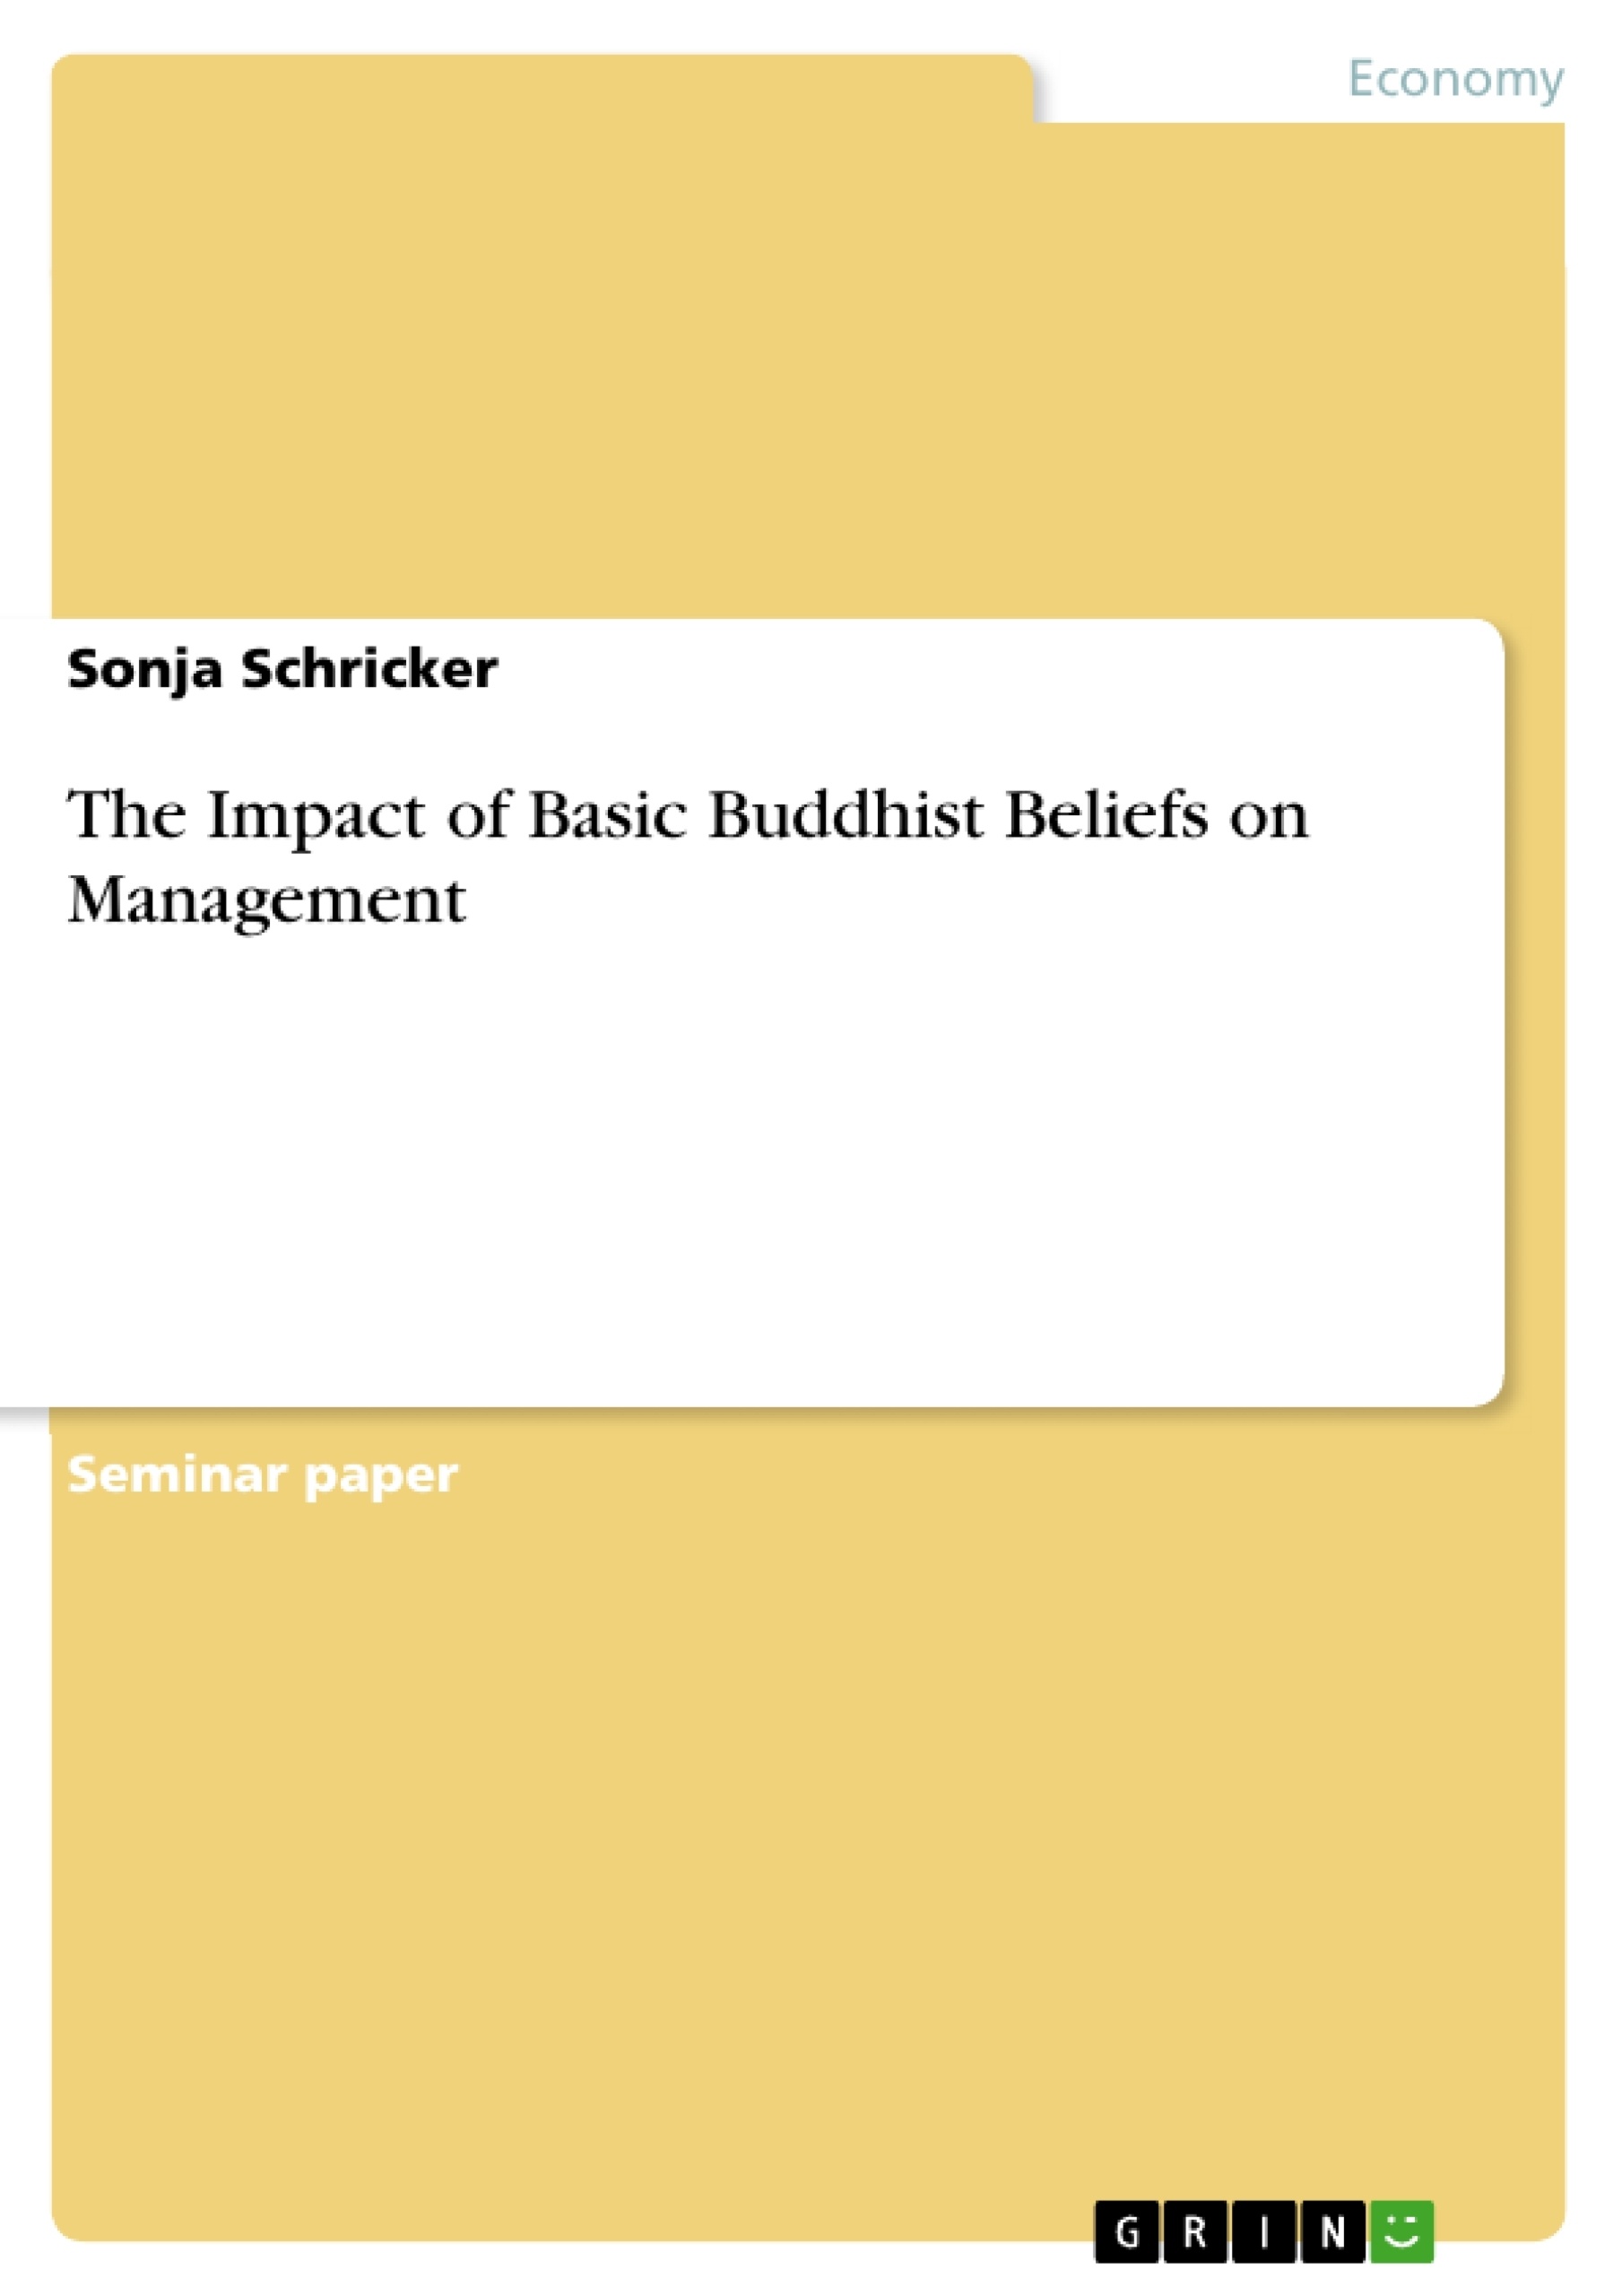 Title: The Impact of Basic Buddhist Beliefs on Management